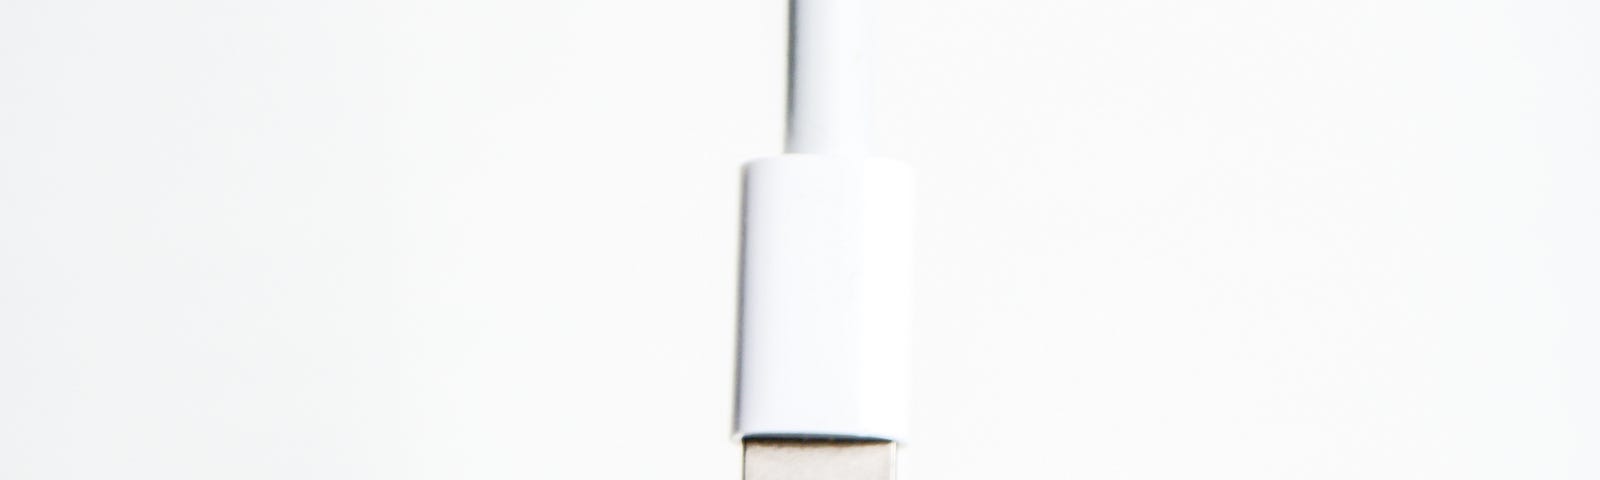 An Apple lightning cable on an off-white background.